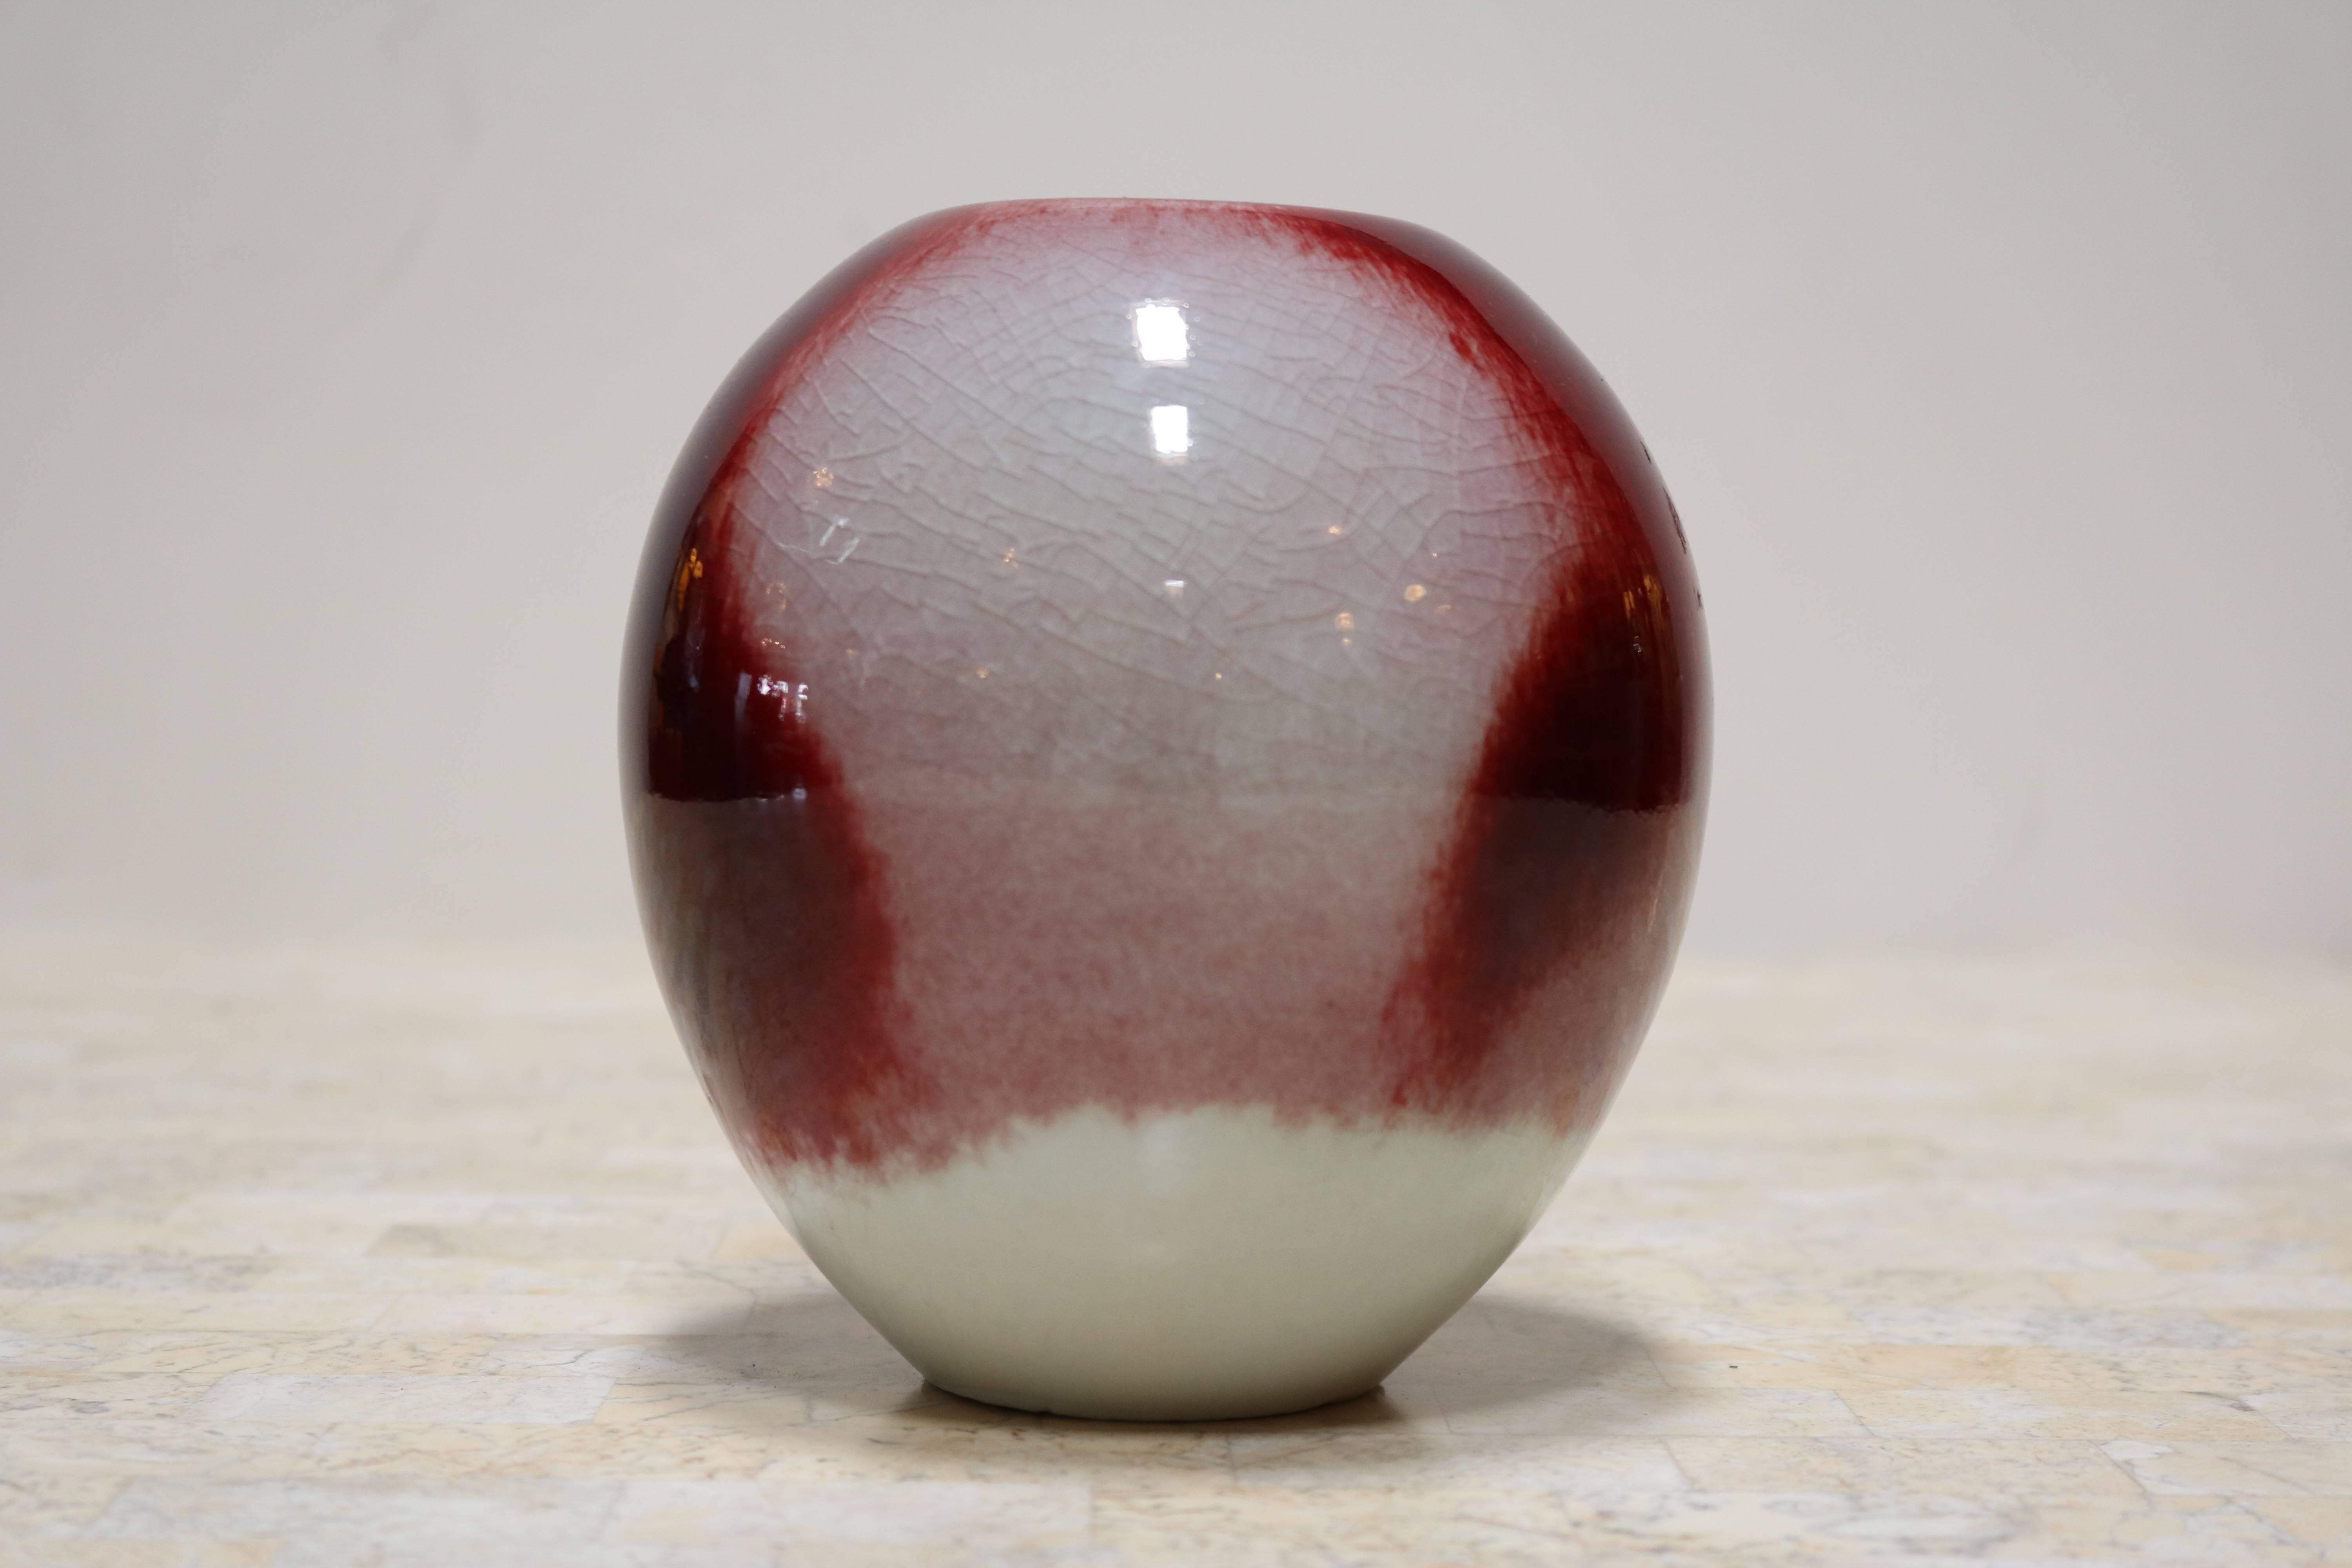 Candy apple red and cream decorative ceramic by Masuo Ojima. Top is recessed and has a small hole not usable as a vessel as it would not be possible to clean, but may have been intended as a stick incense holder and makes for a striking decorative